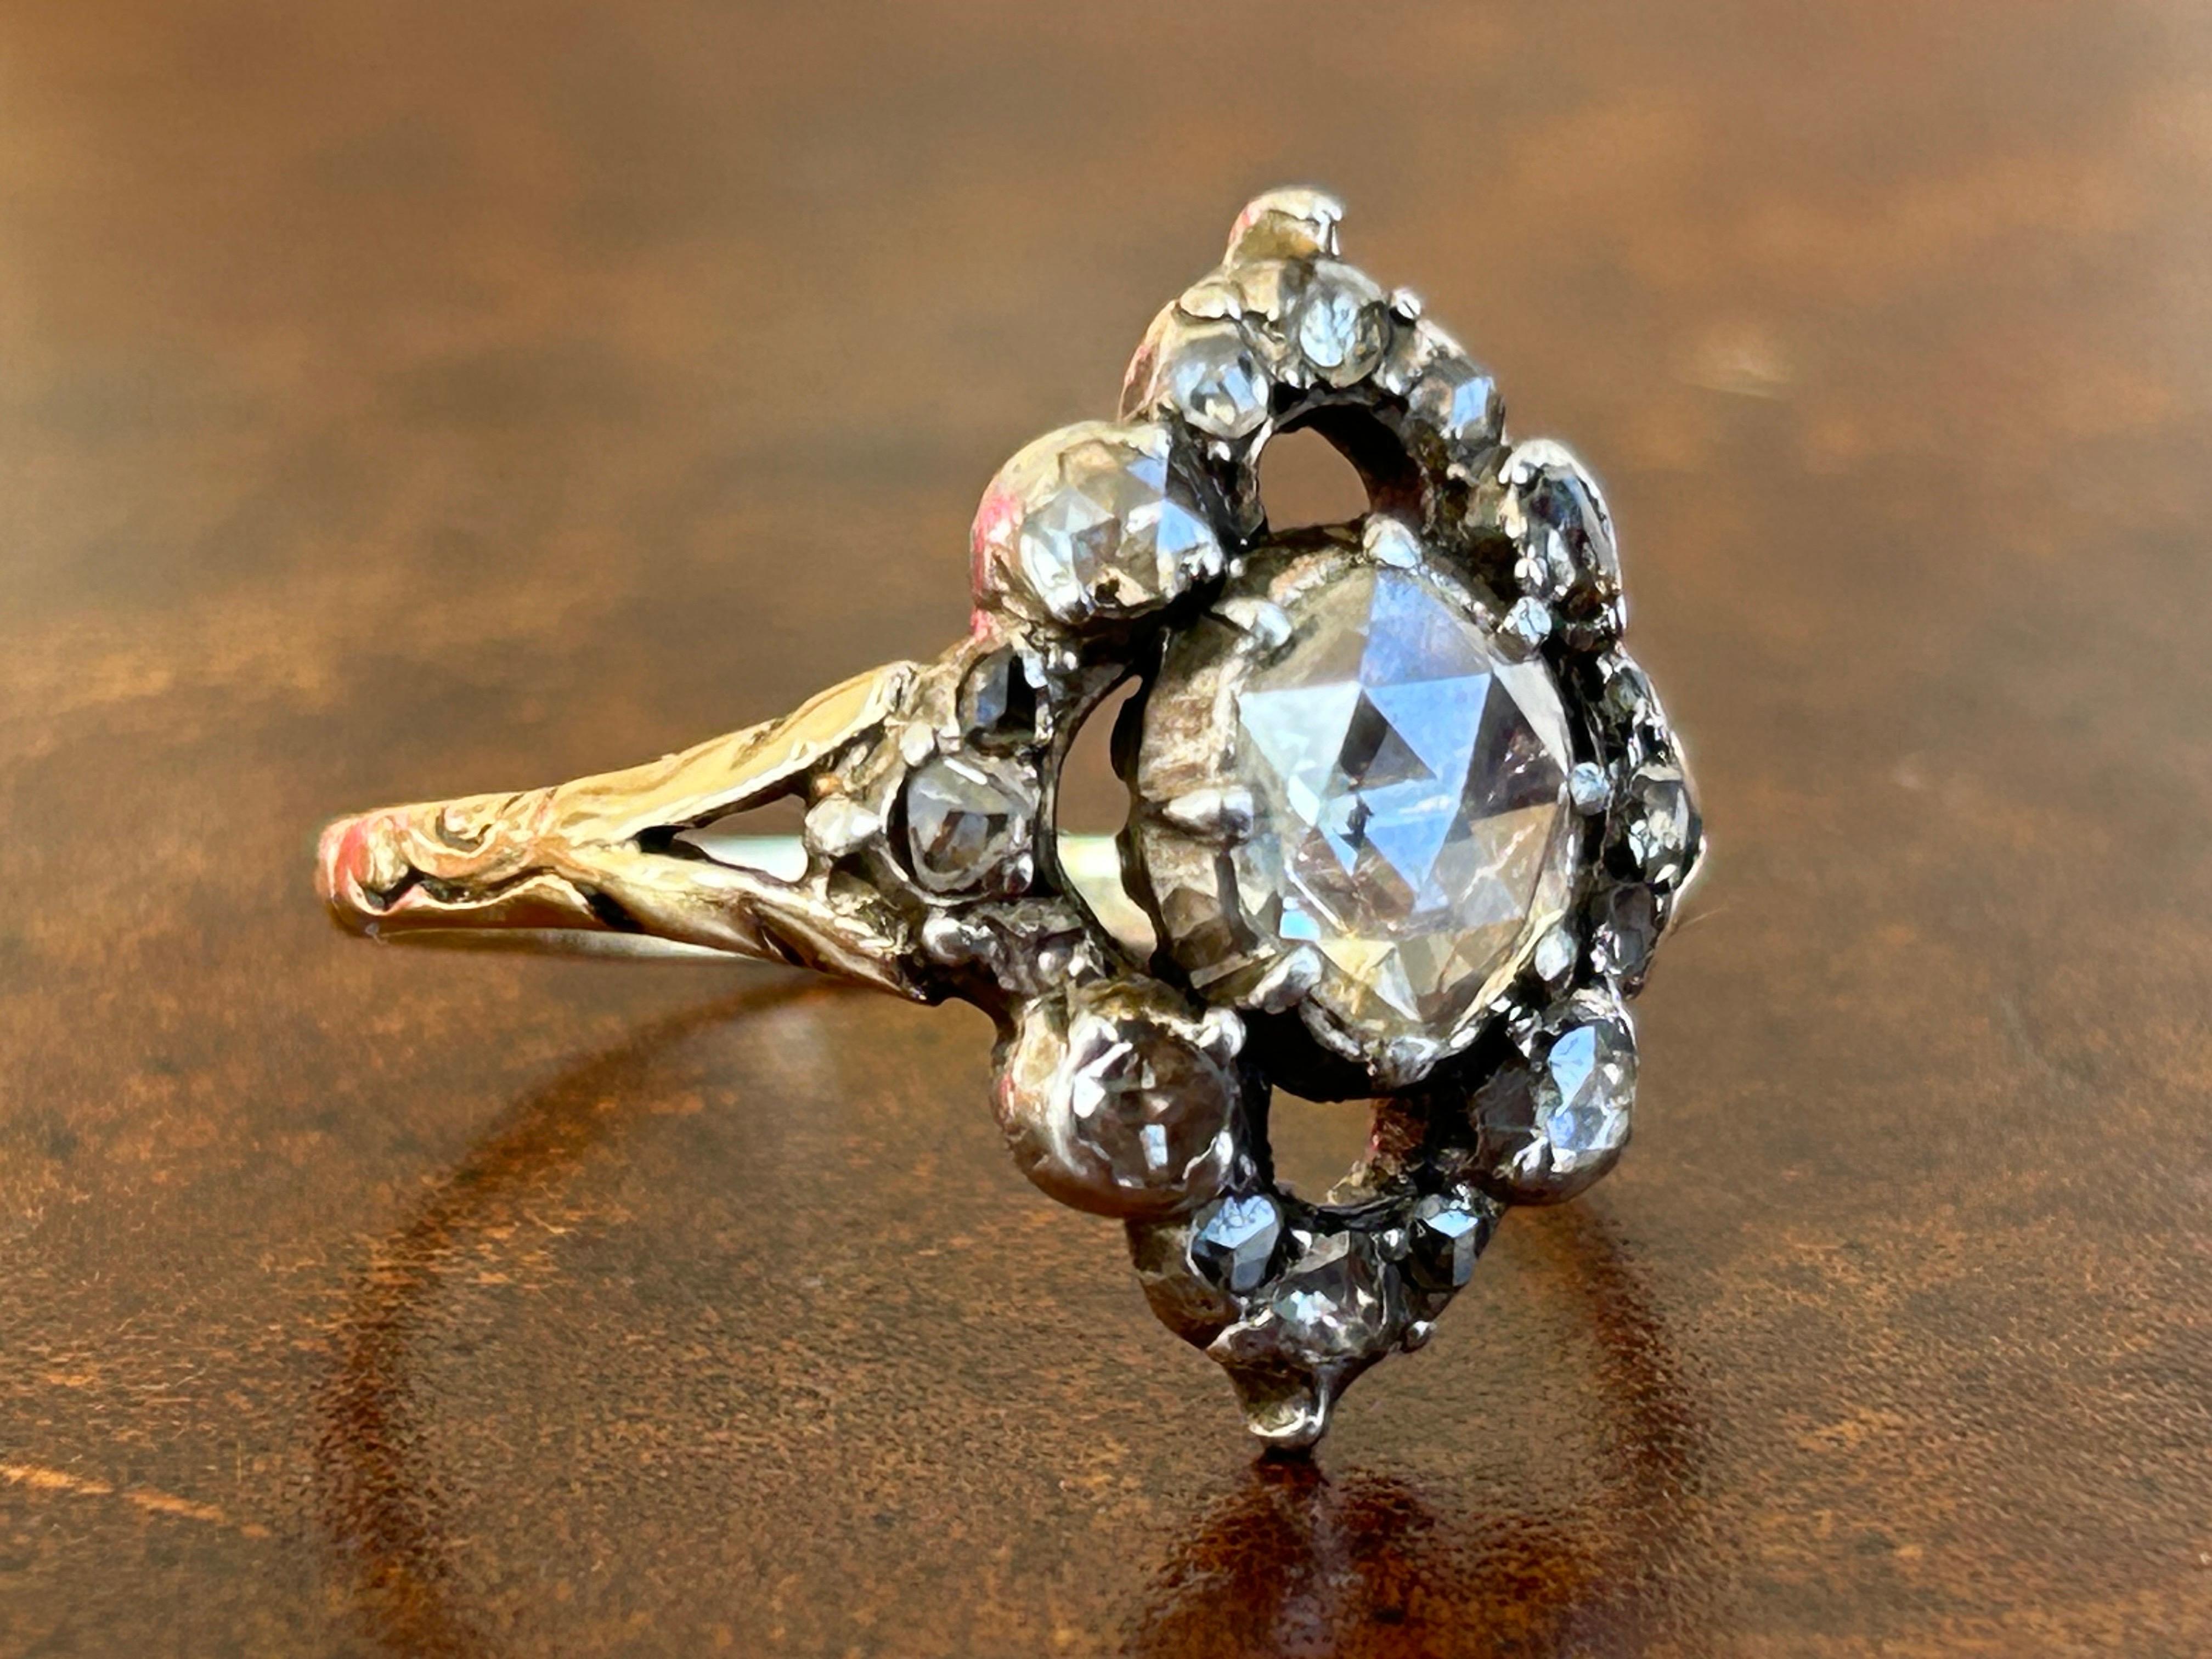 An Antique Georgian Dome Rose Cut Diamond Ring. Boasting a splendid center stone that captures the essence of the Georgian period's sophistication, this 8 mm in length, 7 mm wide, and 3.75 mm deep diamond is meticulously Colette set within a closed